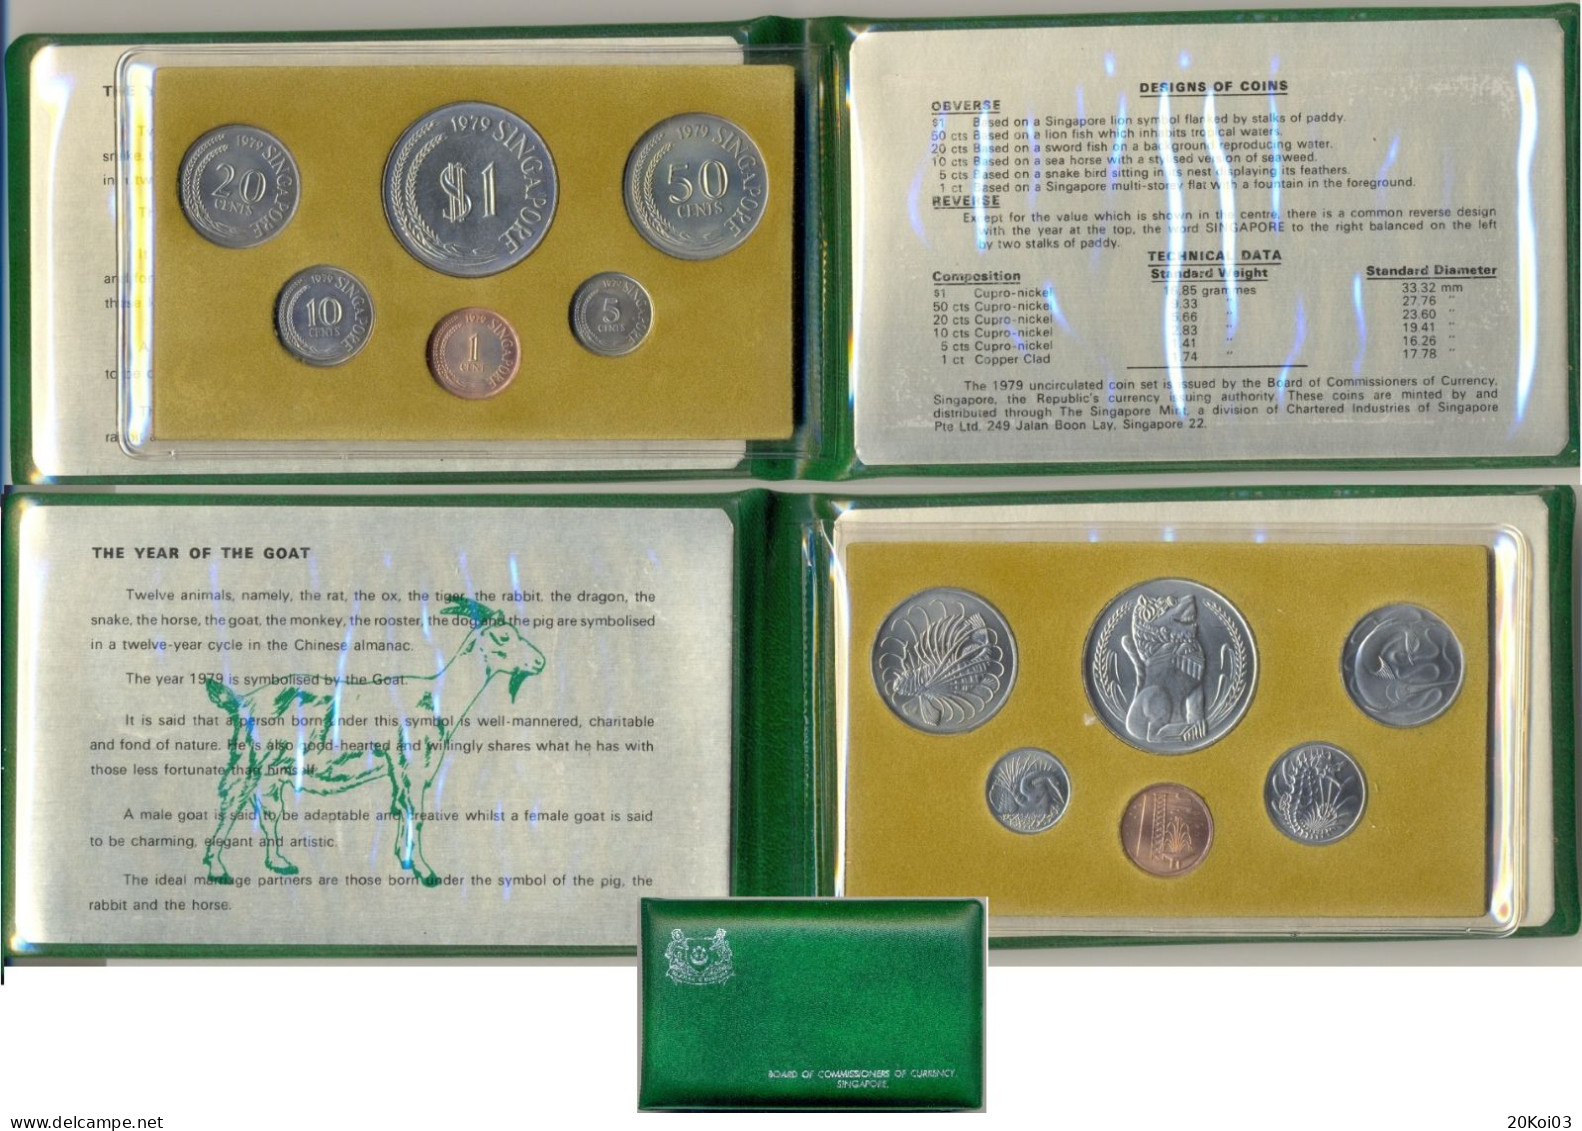 Singapore Coin Set Coins 1979 Uncirculated, The Year Of The Goat, Board Of Commissioners Of Currency_SUP - Singapur